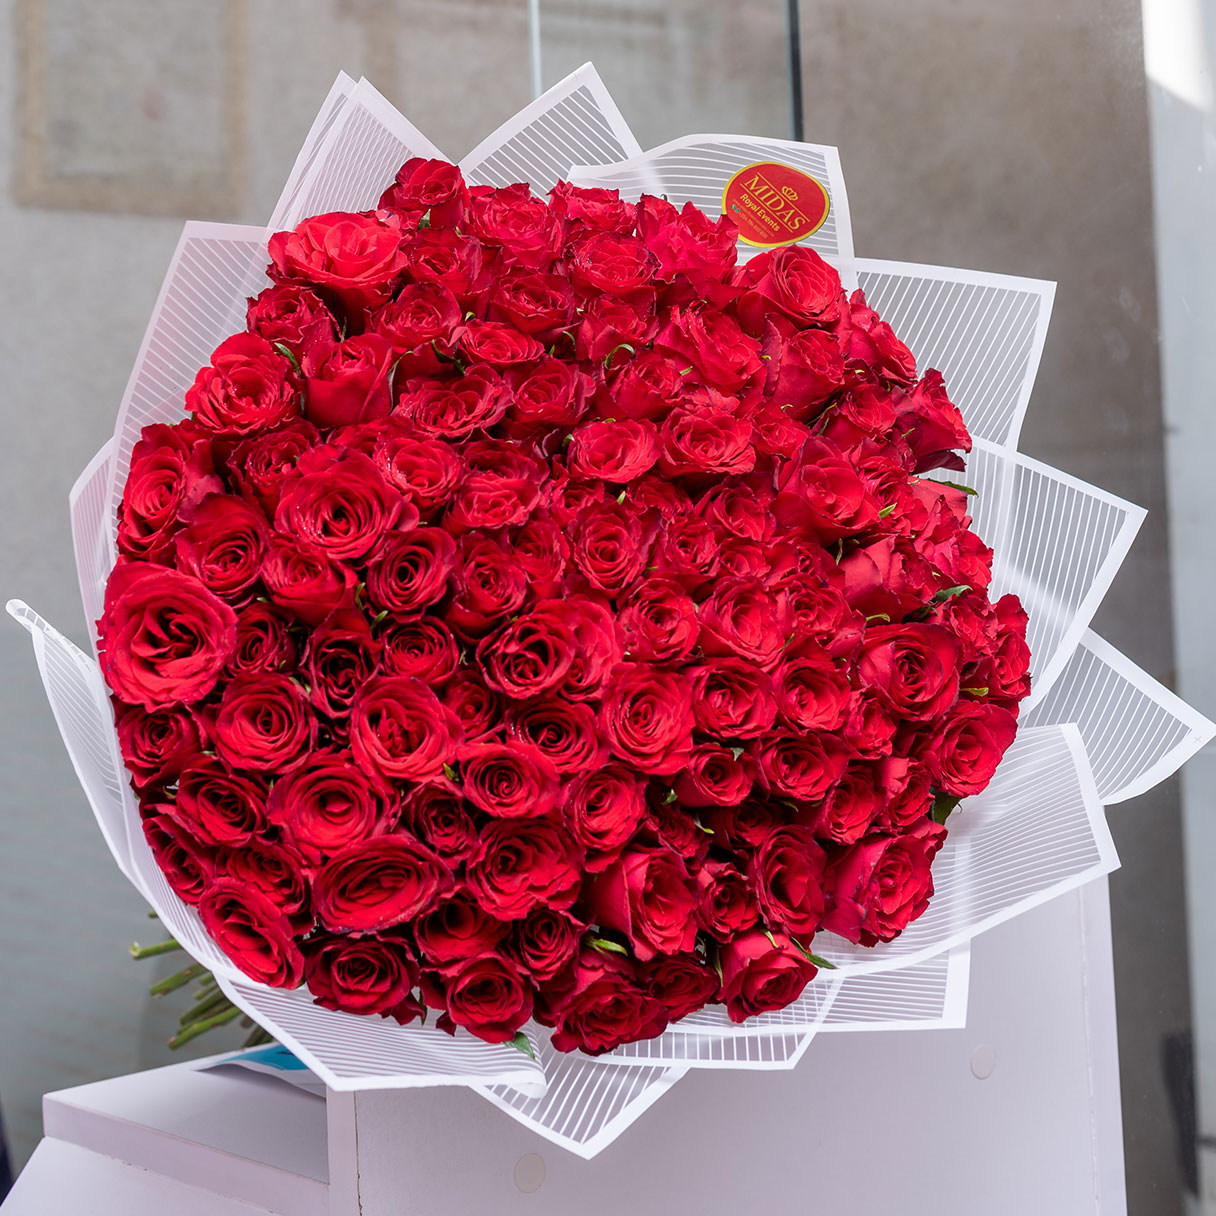 A Garden of Red Roses 100 Stem Bouquet - Midas Flowers Delivery